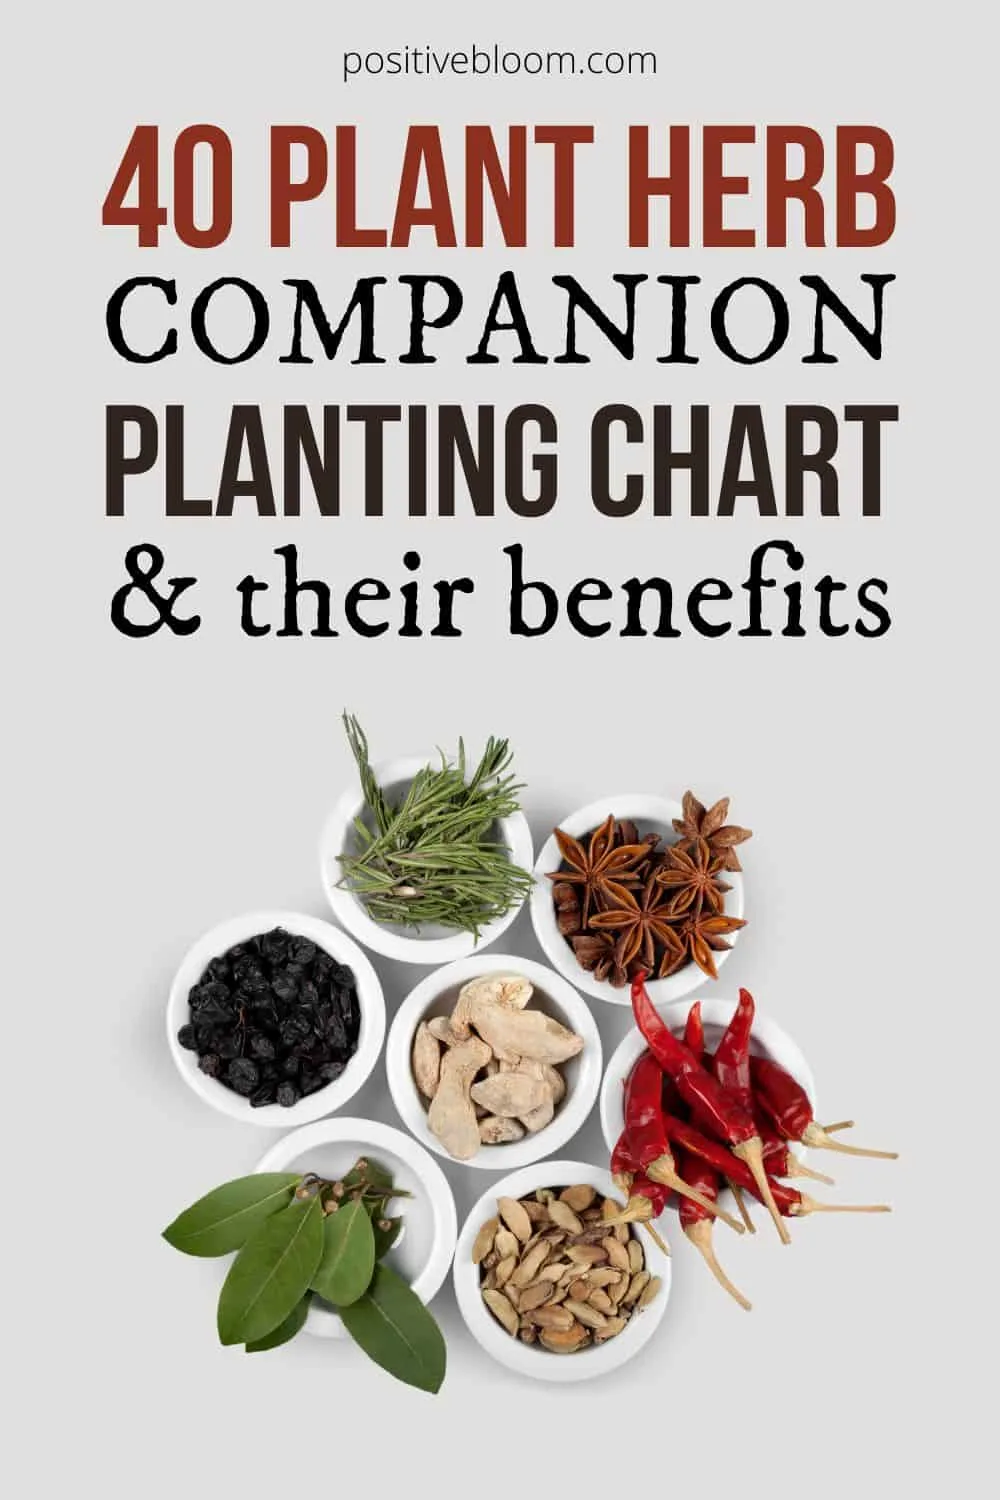 40 Plant Herb Companion Planting Chart And Their Benefits Pinterest